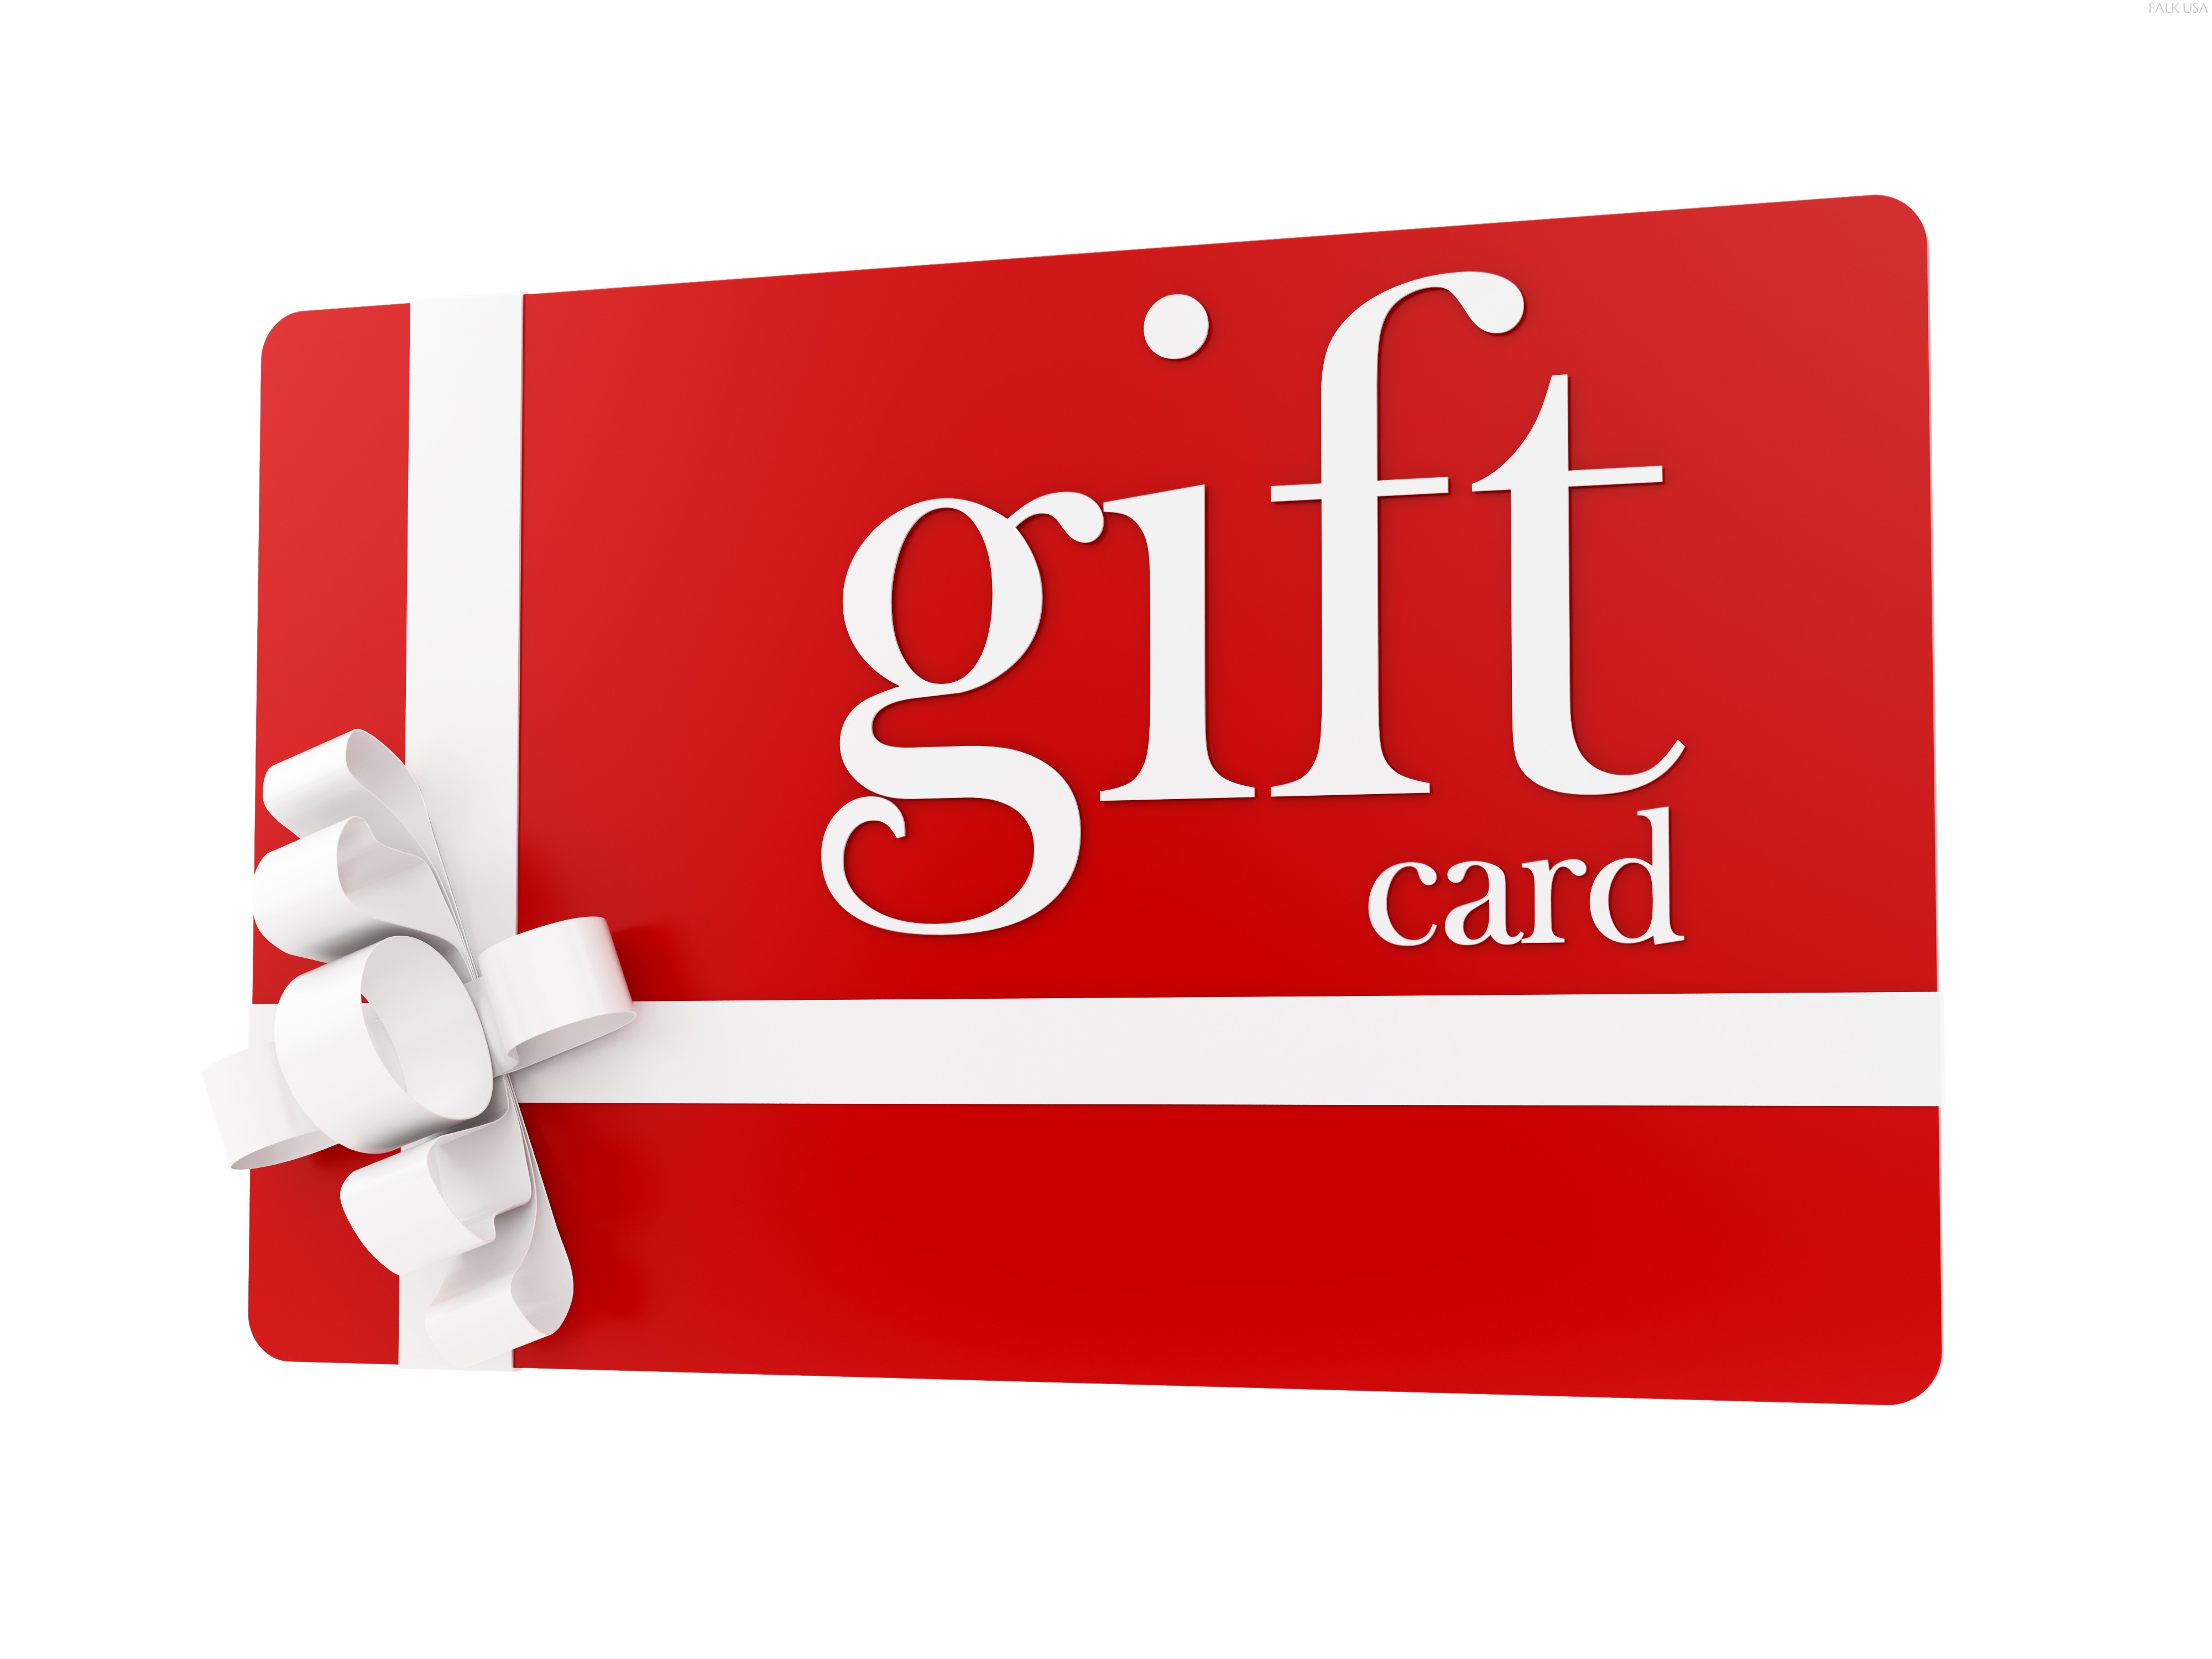 What Are the Pros and Cons of Gift Cards?